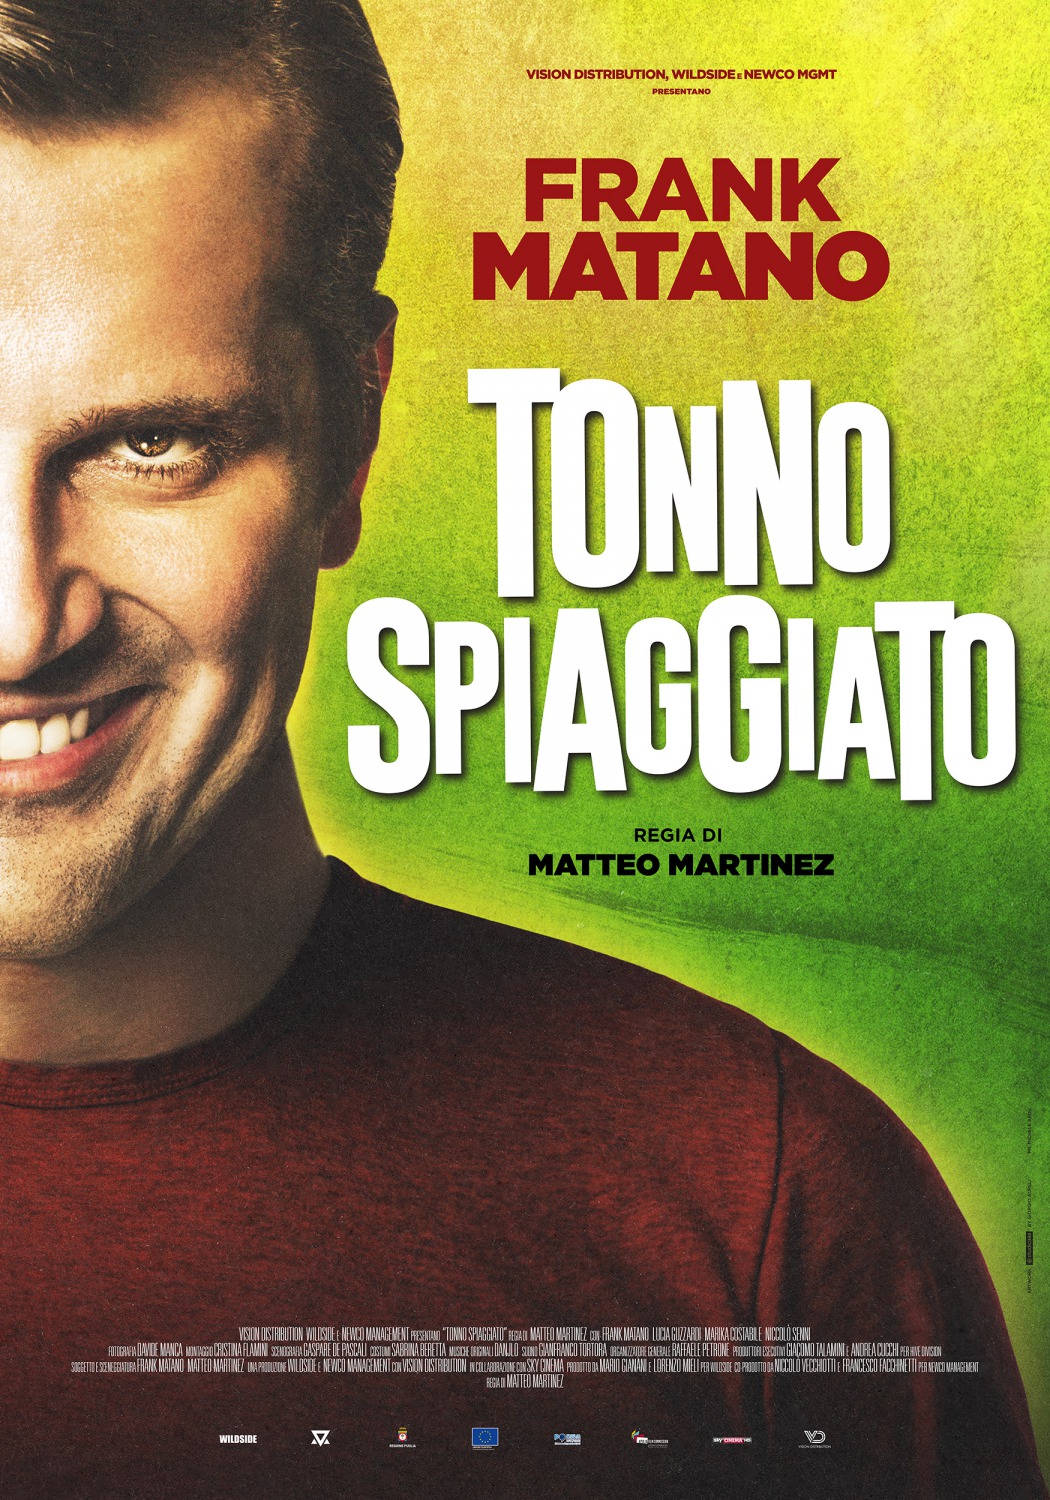 Extra Large Movie Poster Image for Tonno spiaggiato 